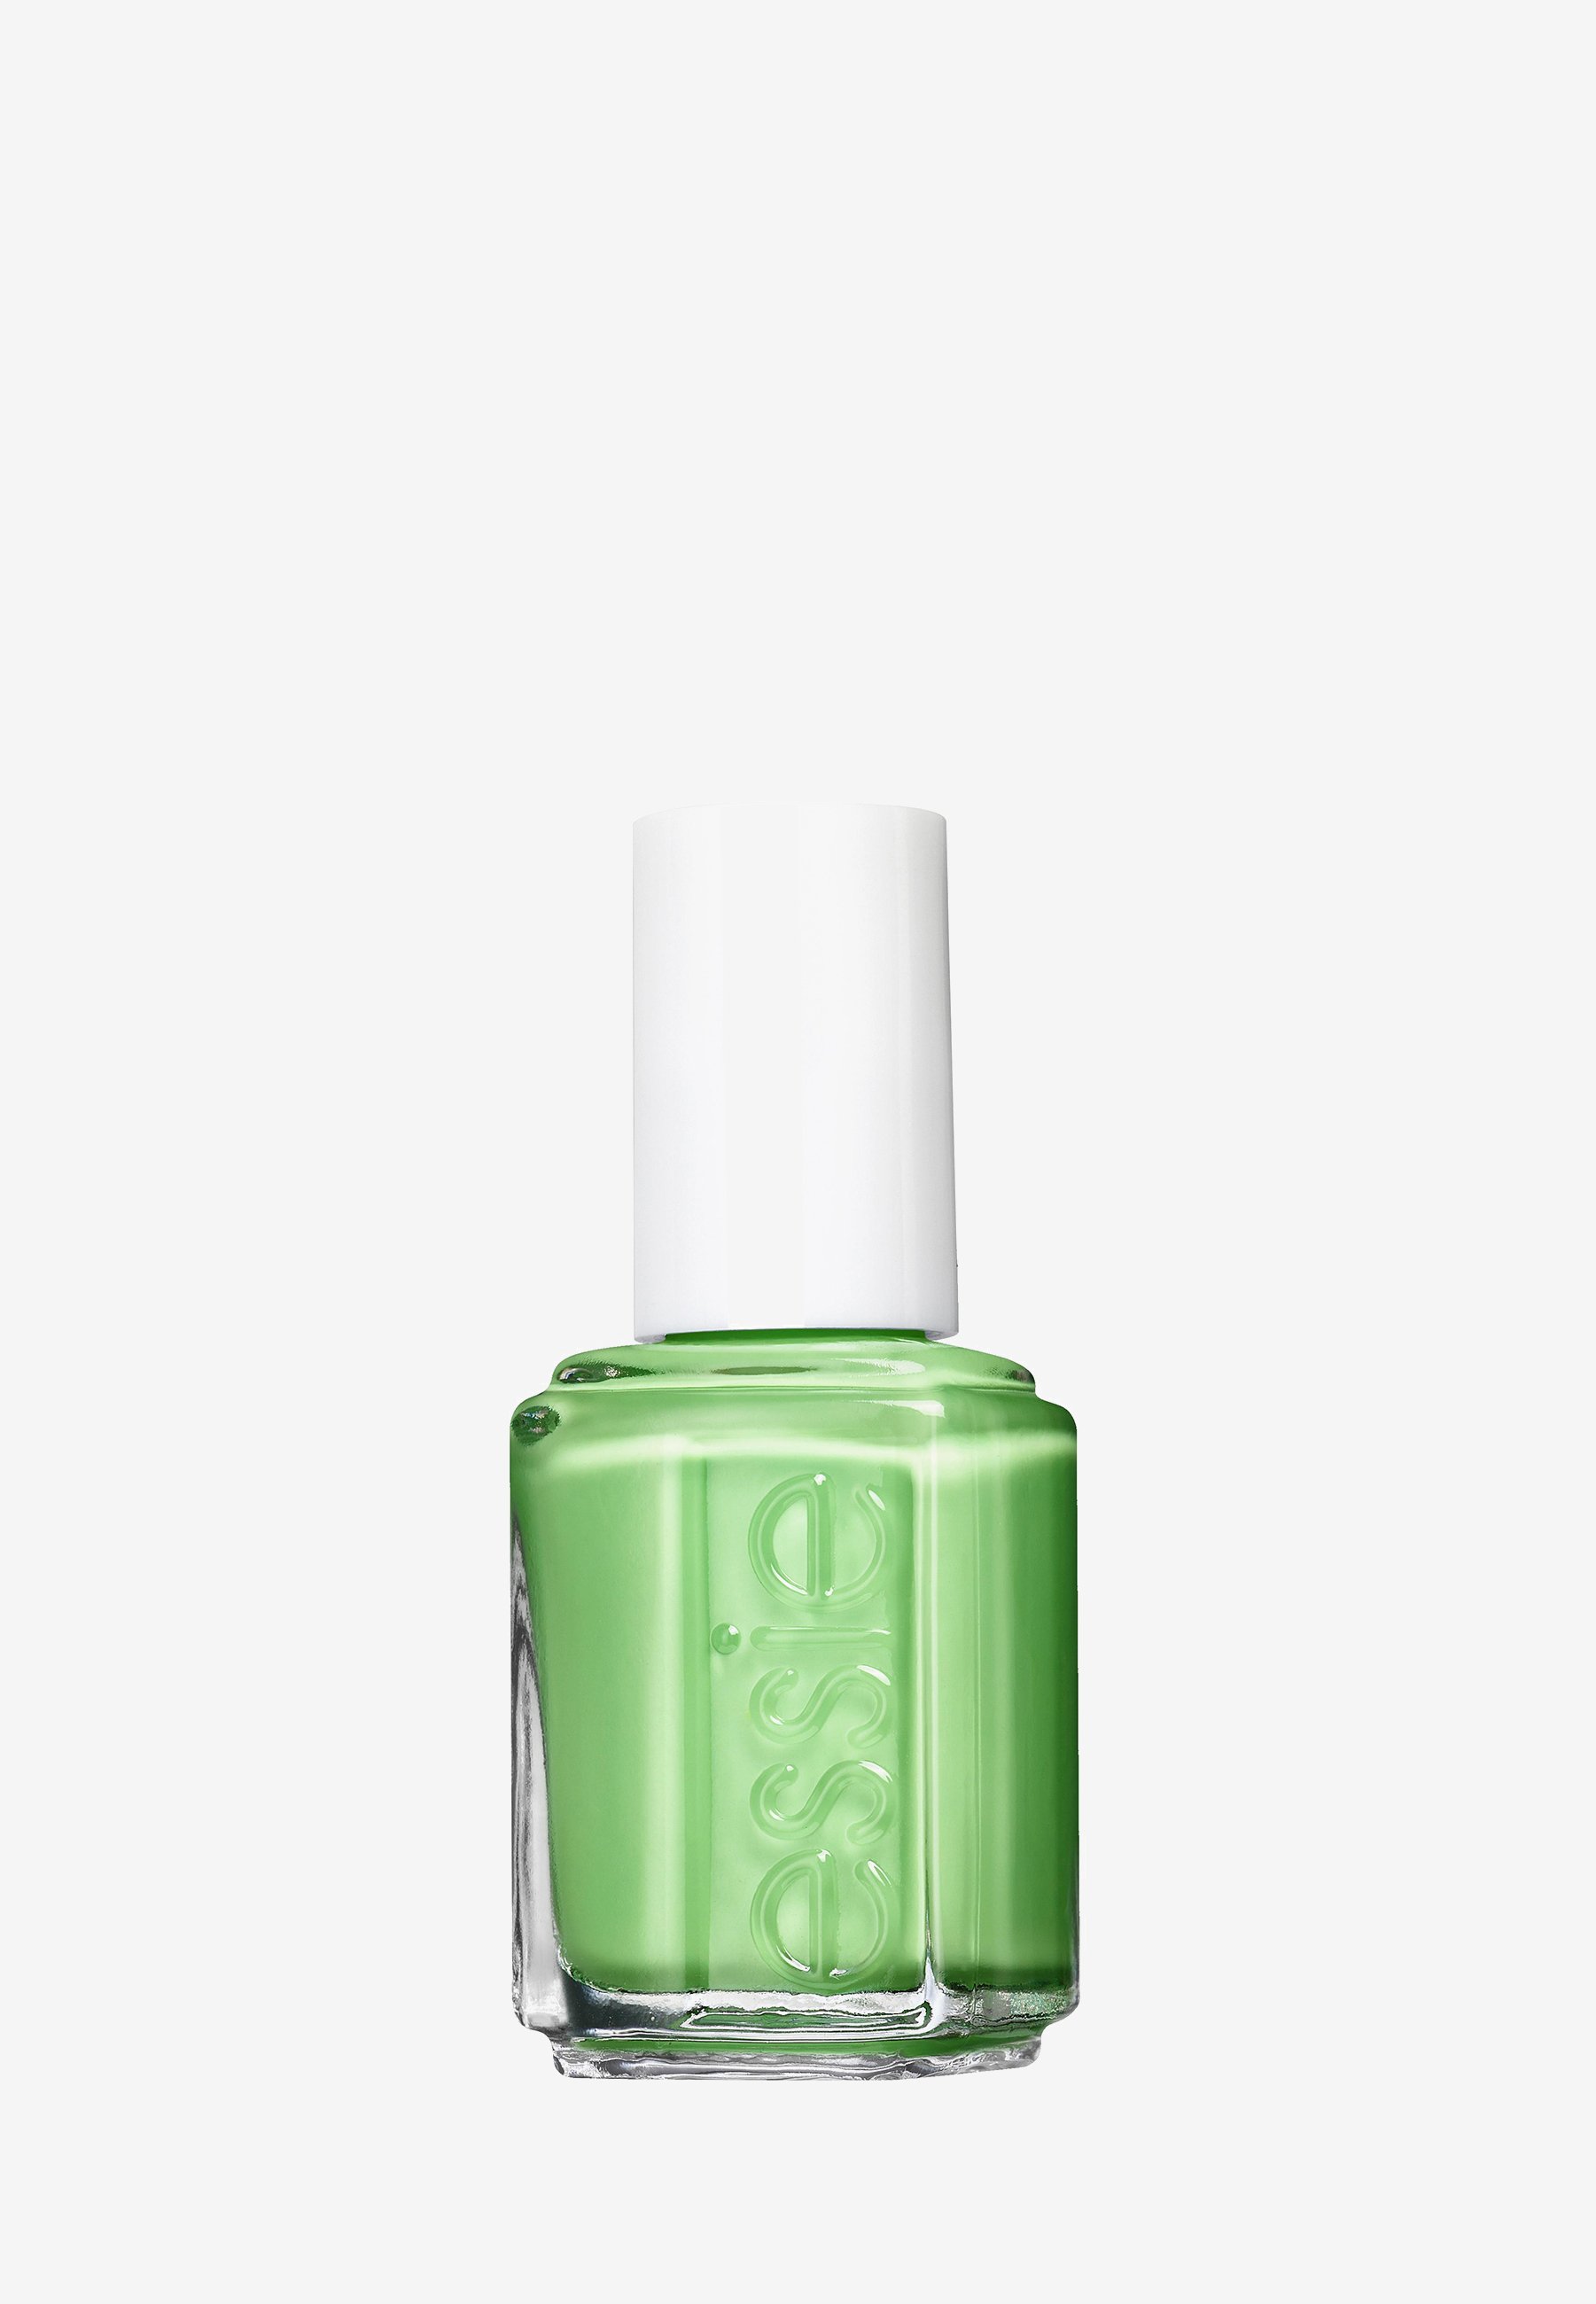 Essie NAIL POLISH COLLECTION HAVE A BALL - Nagellack - 794 double trouble/grün